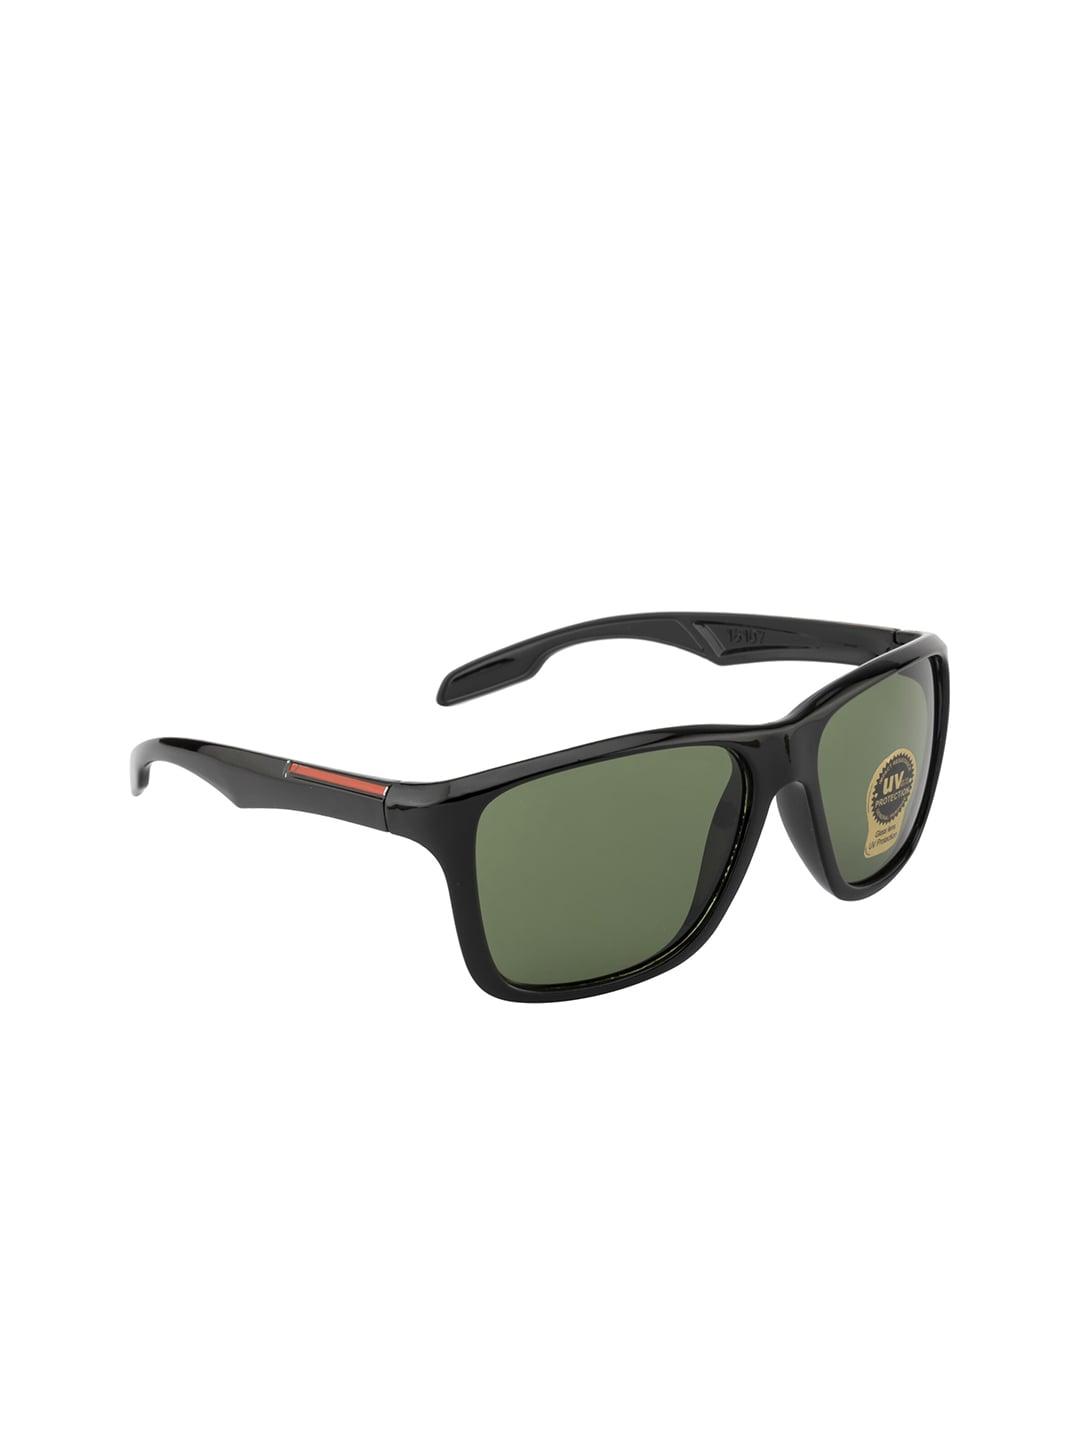 mast & harbour green lens & black sports sunglasses with uv protected lens-mh-m22375